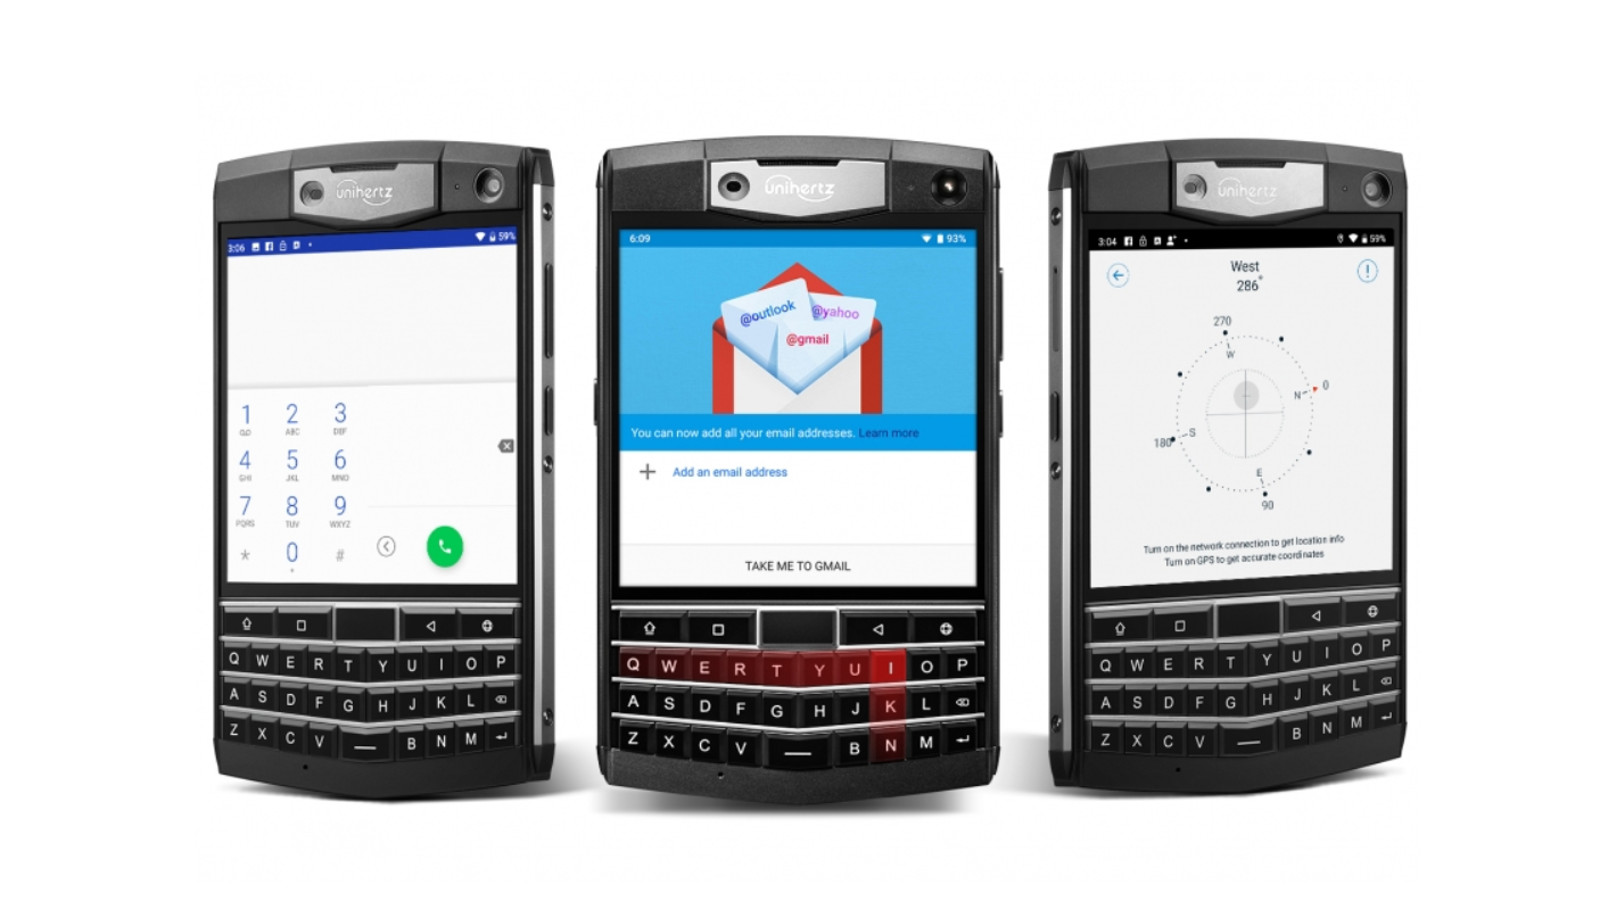 Unihertz Titan is a BlackBerry Passport clone with Android, huge battery